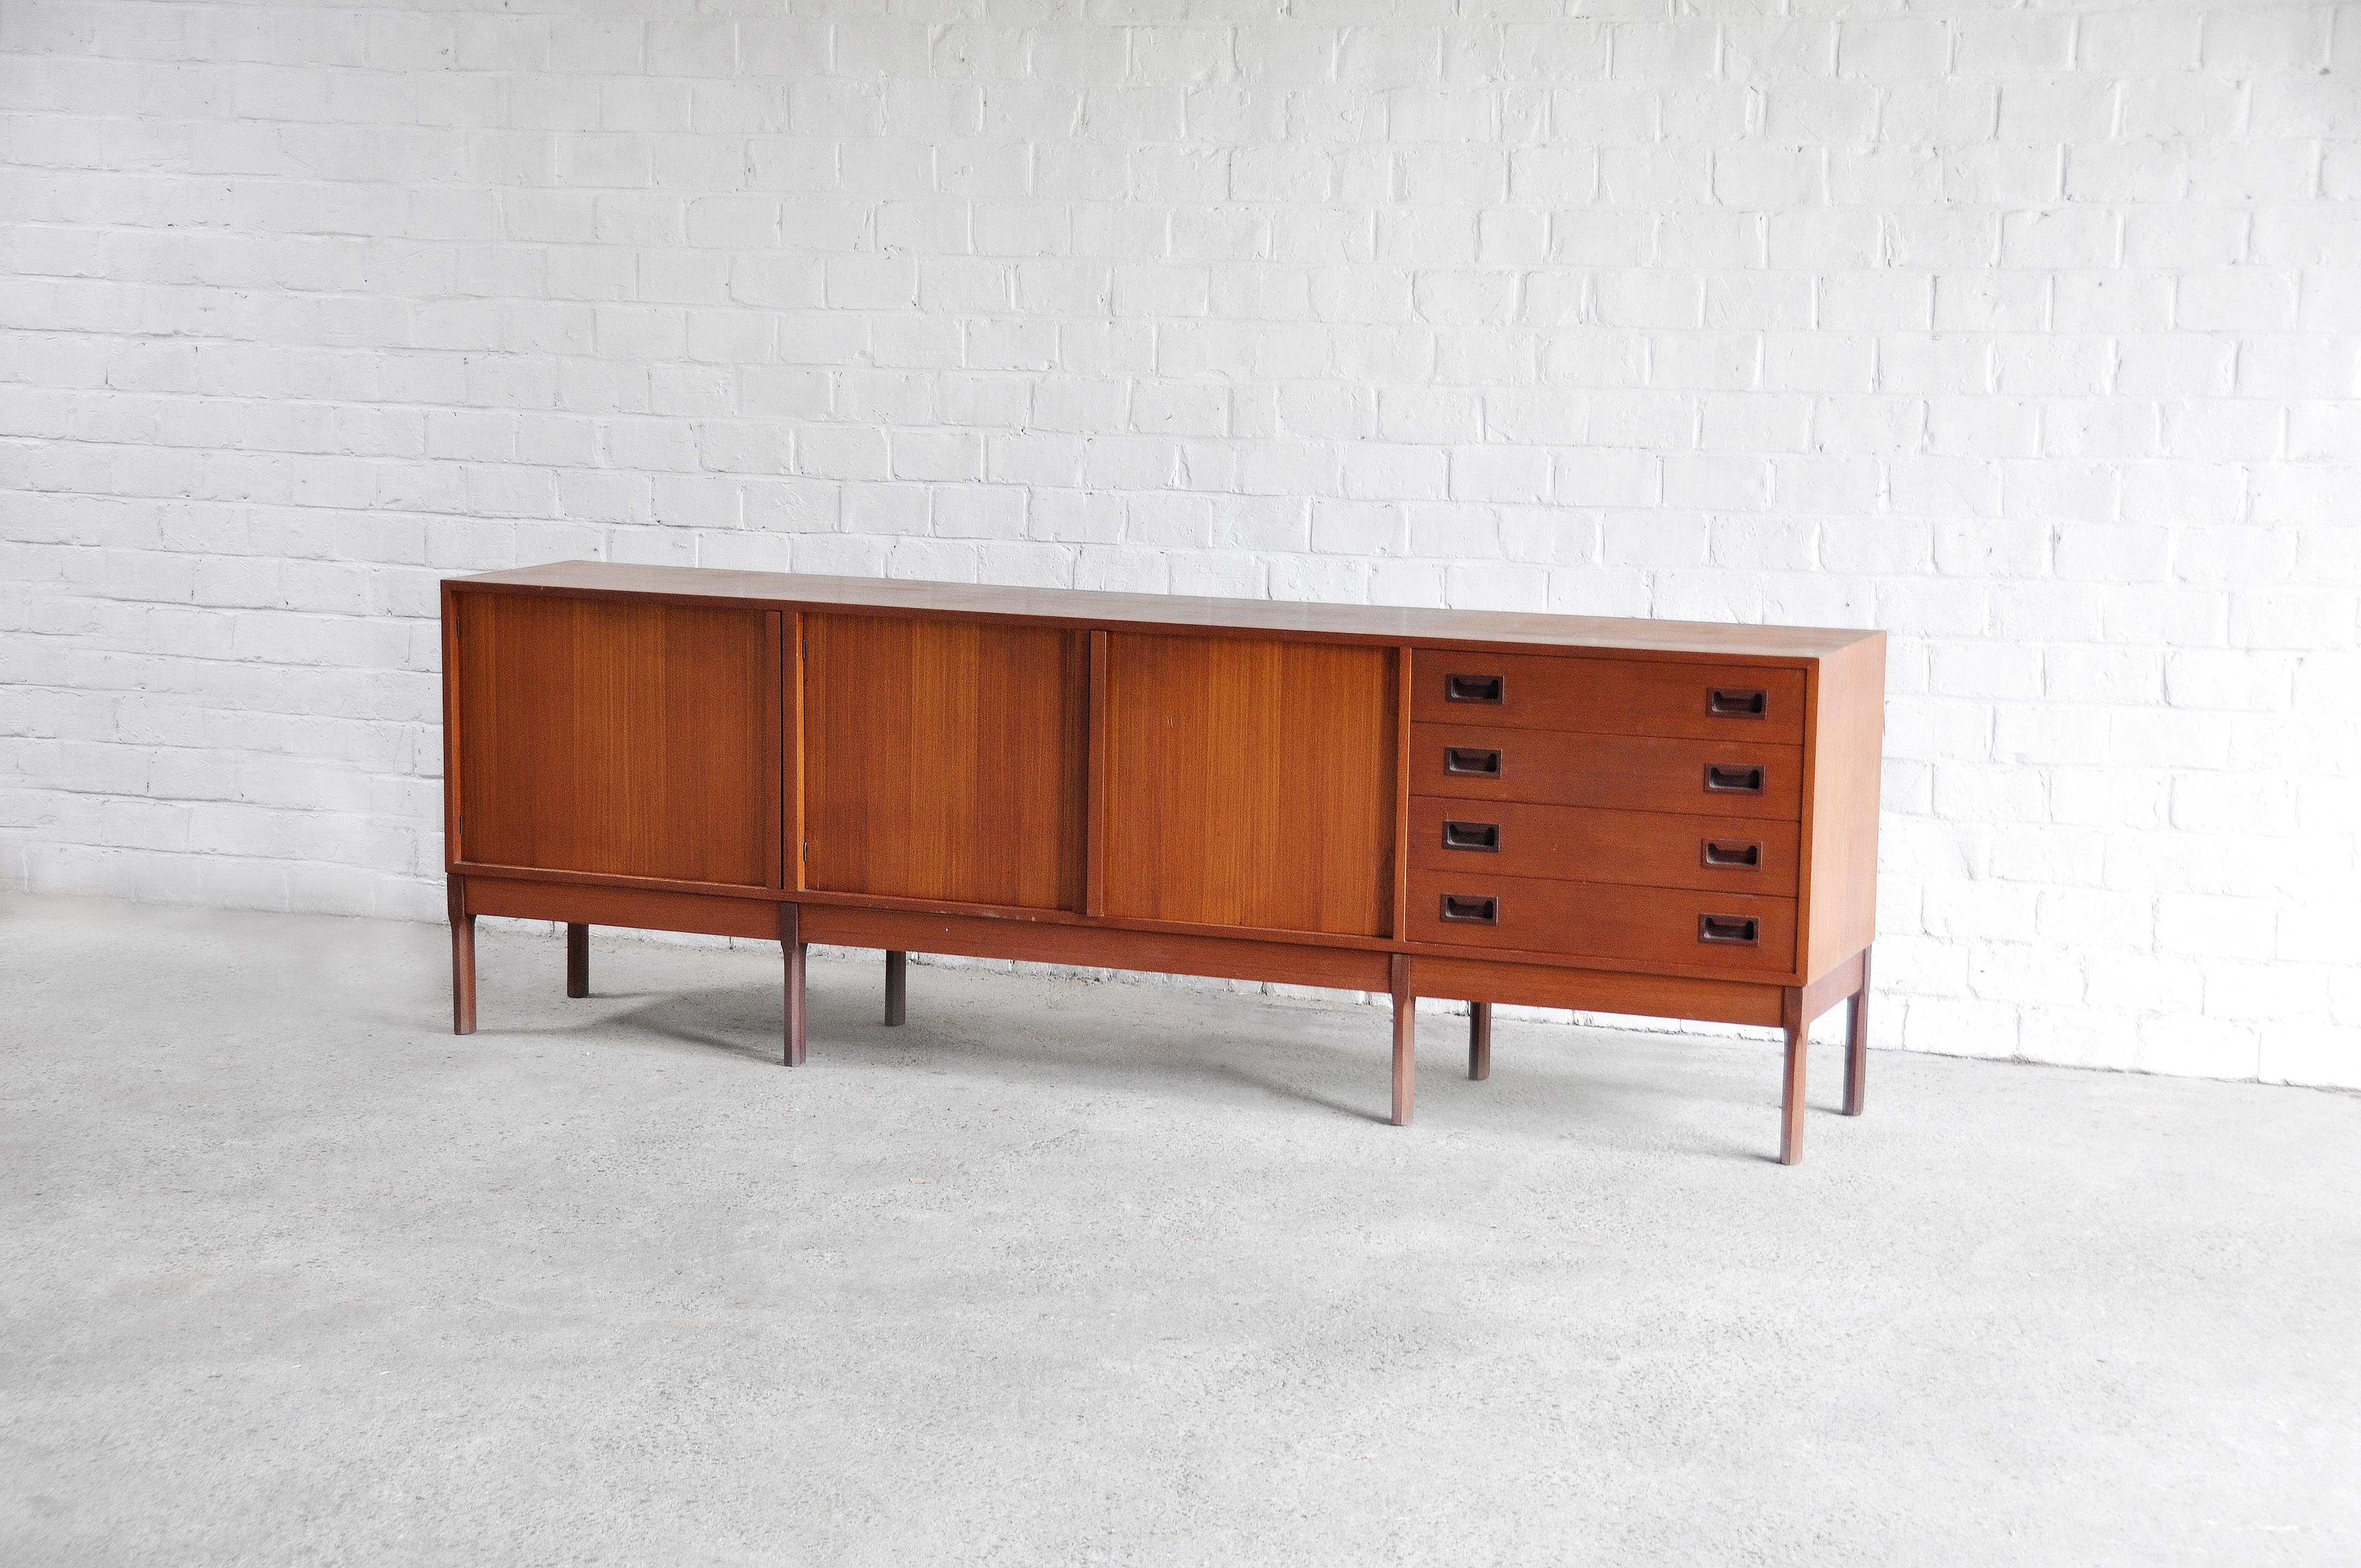 A beautiful Italian midcentury teak sideboard with four drawers and three sliding doors. The colored teak wood brings a warm feel to the design. The cabinet stands on a wooden structure of eight legs. Remains in good vintage condition, wear